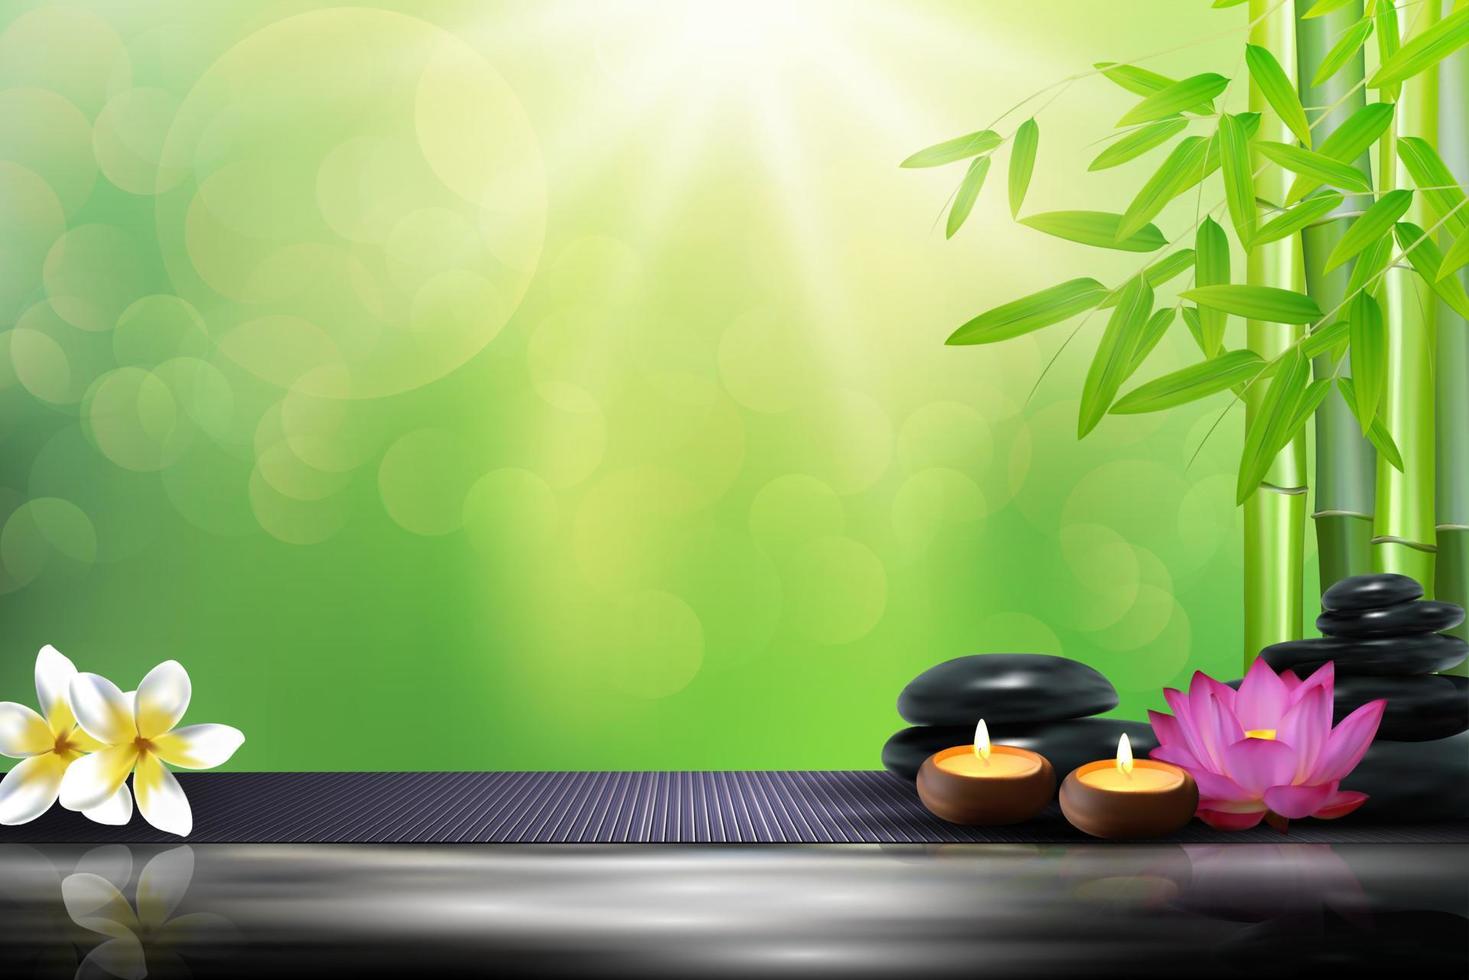 Bamboo, flowers, stone, wax and background  on the big stone . vector